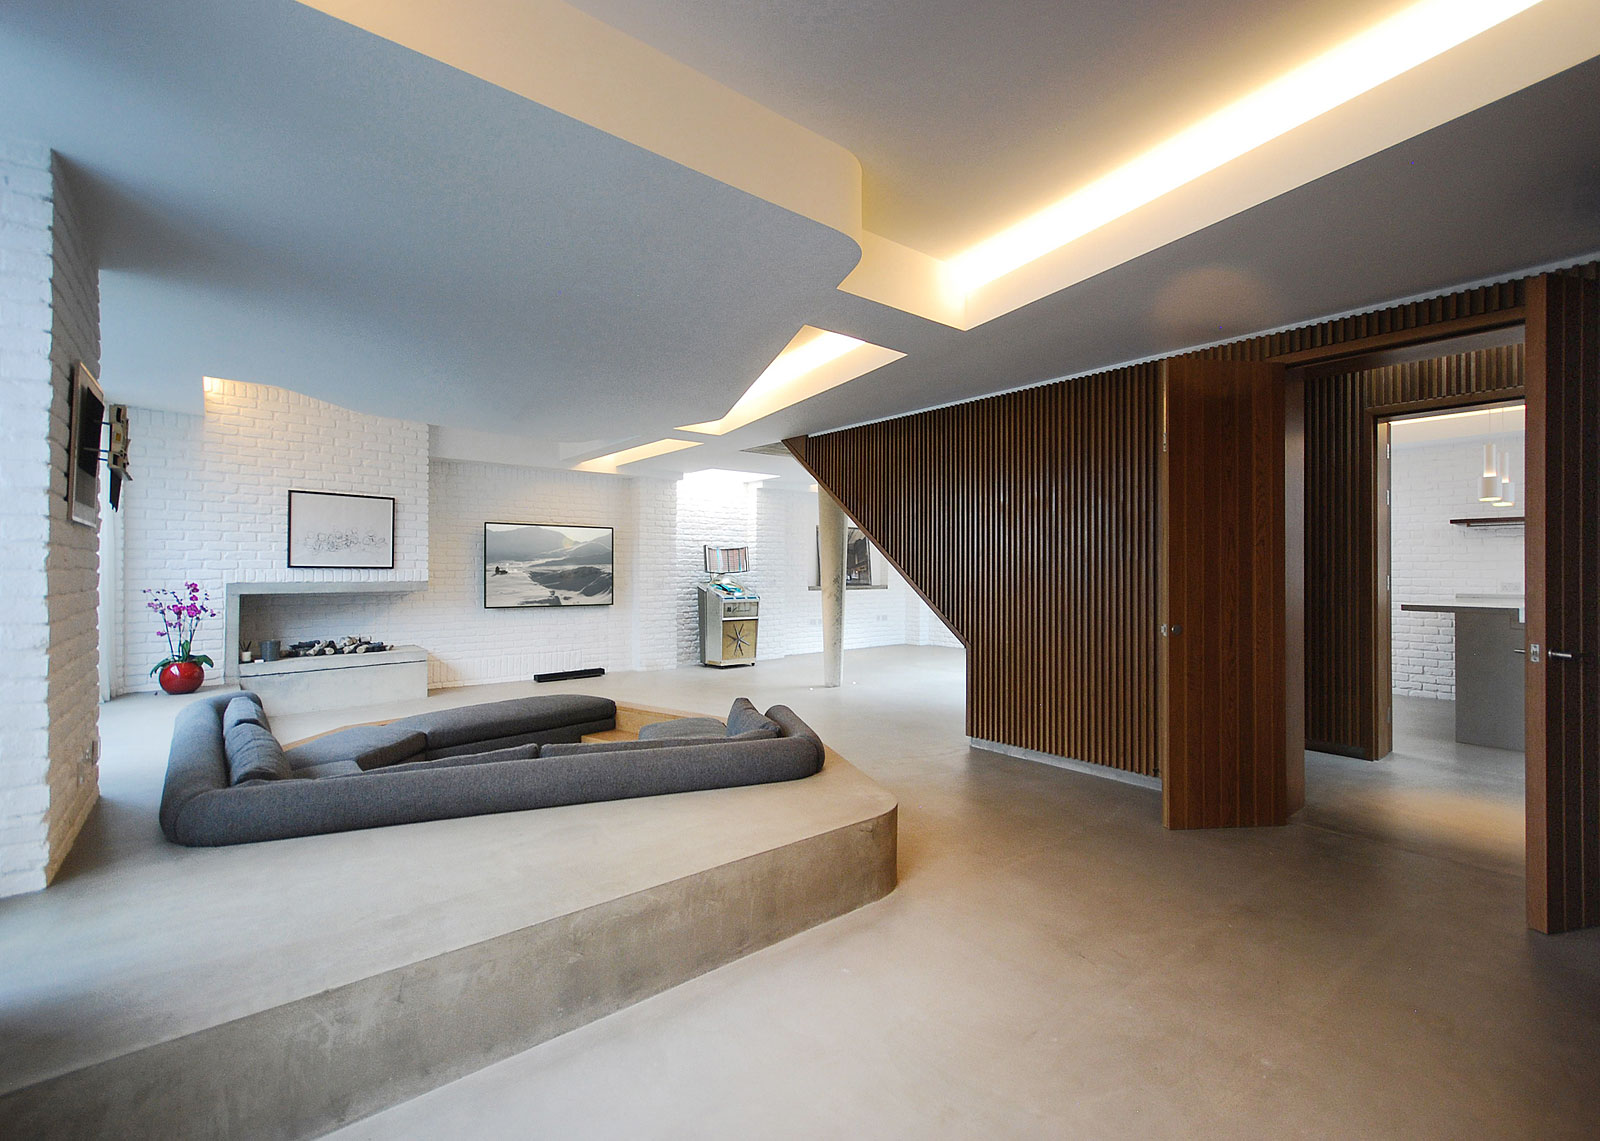 Contemporary interior featuring concrete floor, sunken seating area, brick walls and timber cladding